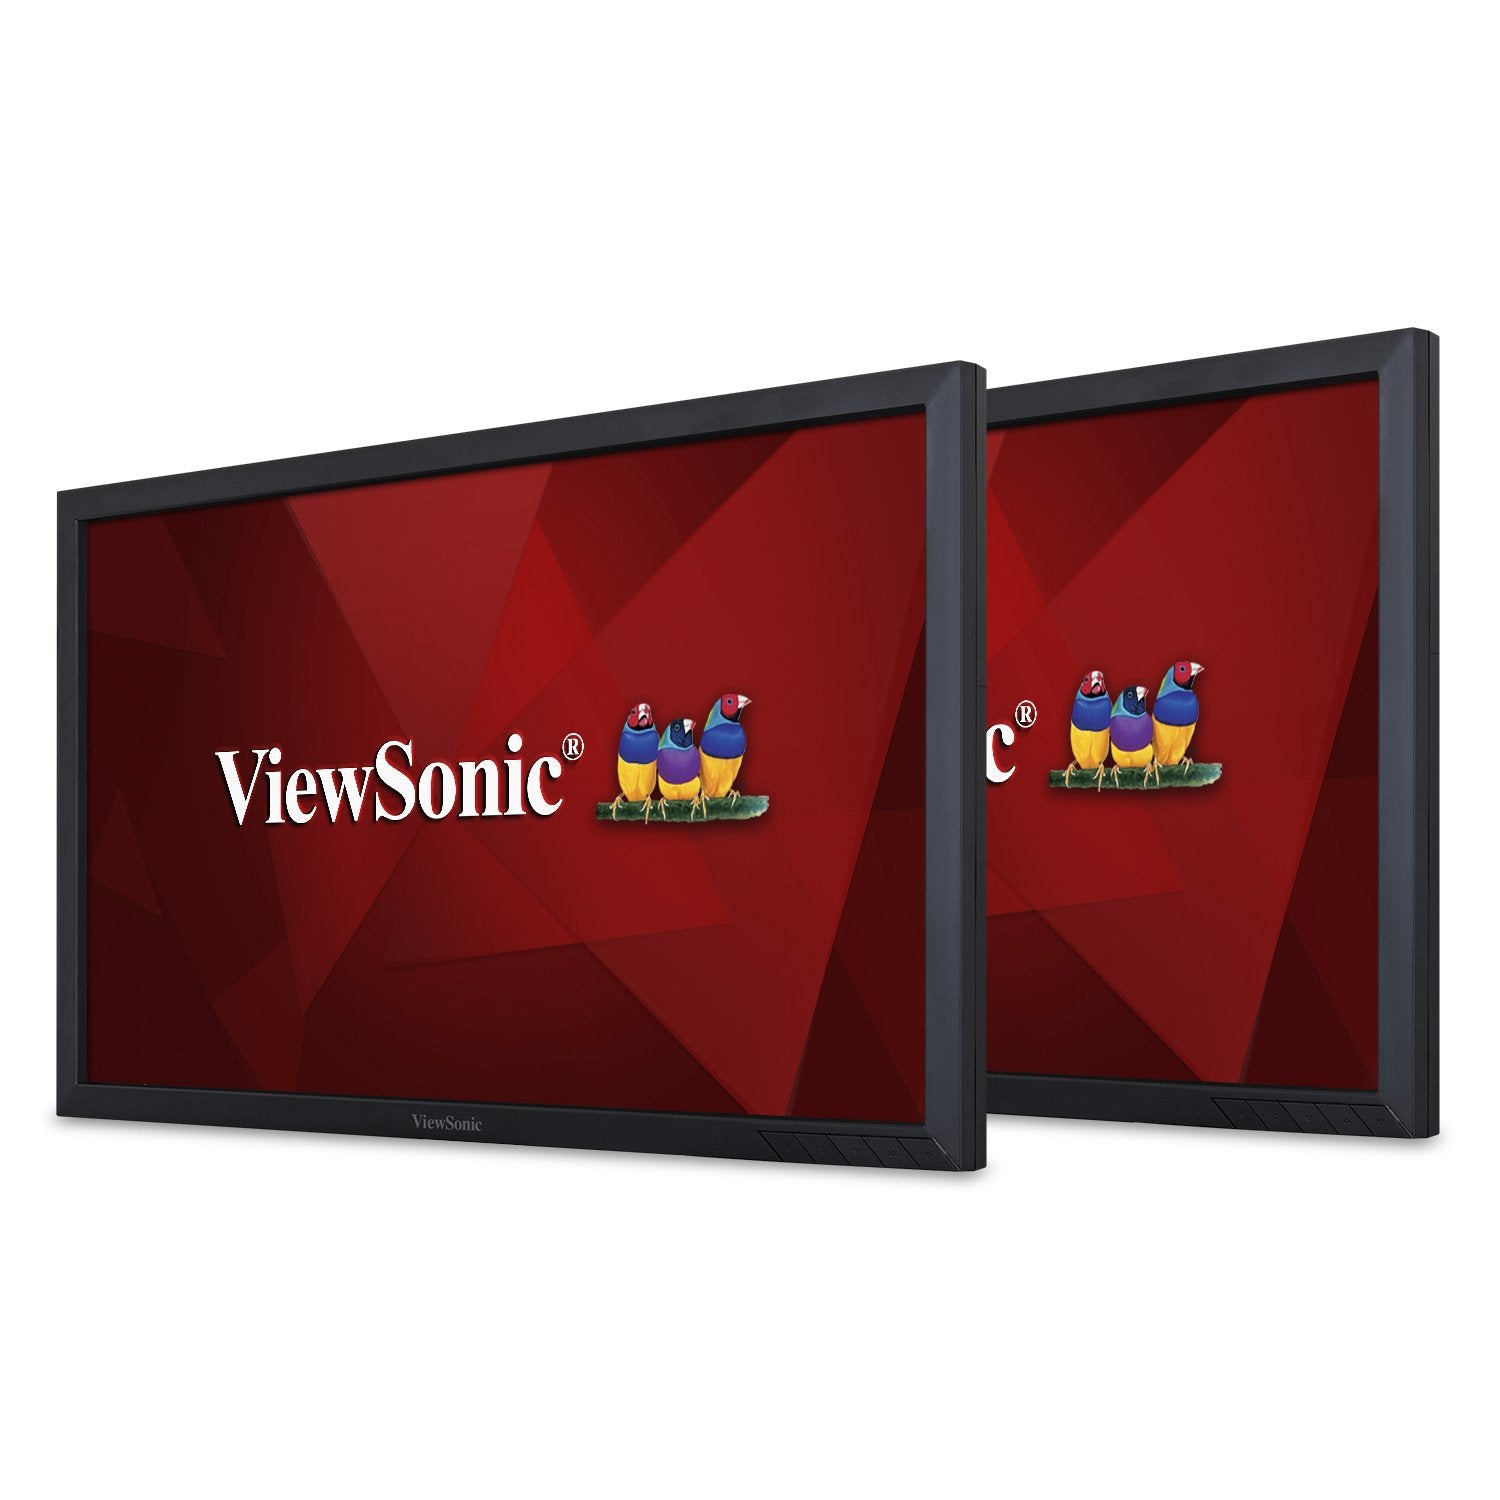 ViewSonic VG2249_H-S 22" LED LCD Monitor - Certified Refurbished